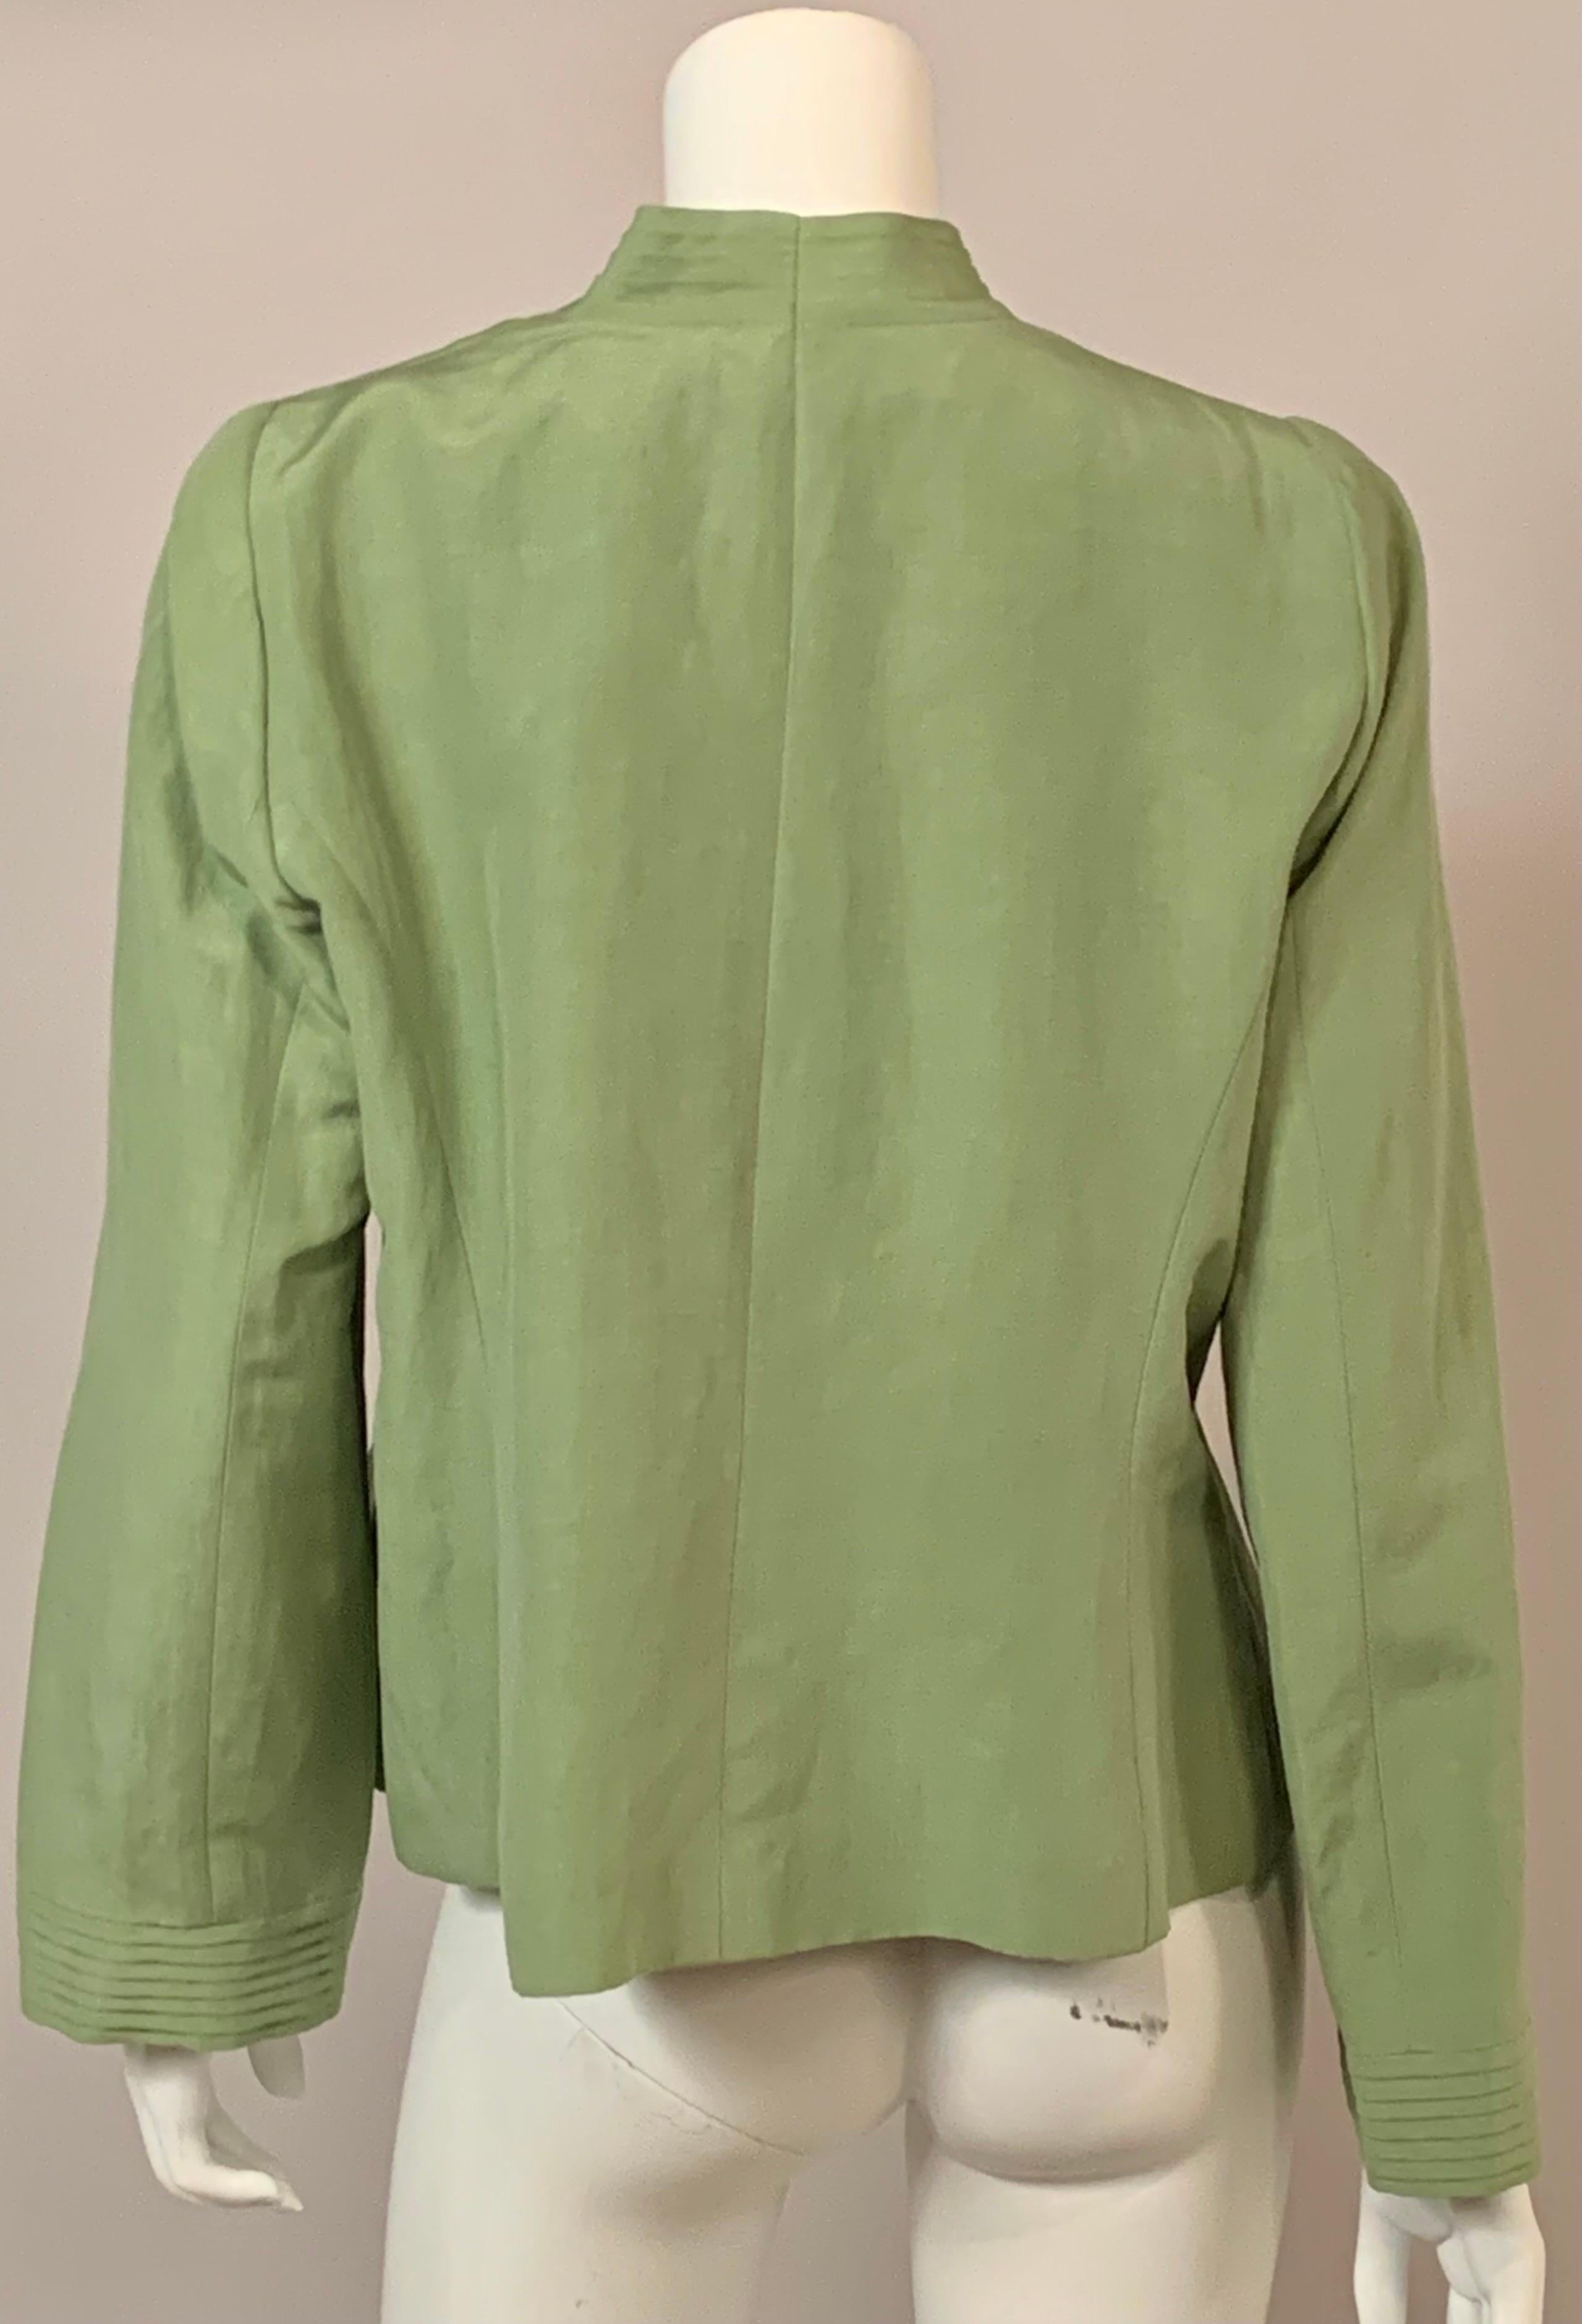 Armani Green Linen and Silk Blend Jacket with Pleated Collar and Cuffs For Sale 4